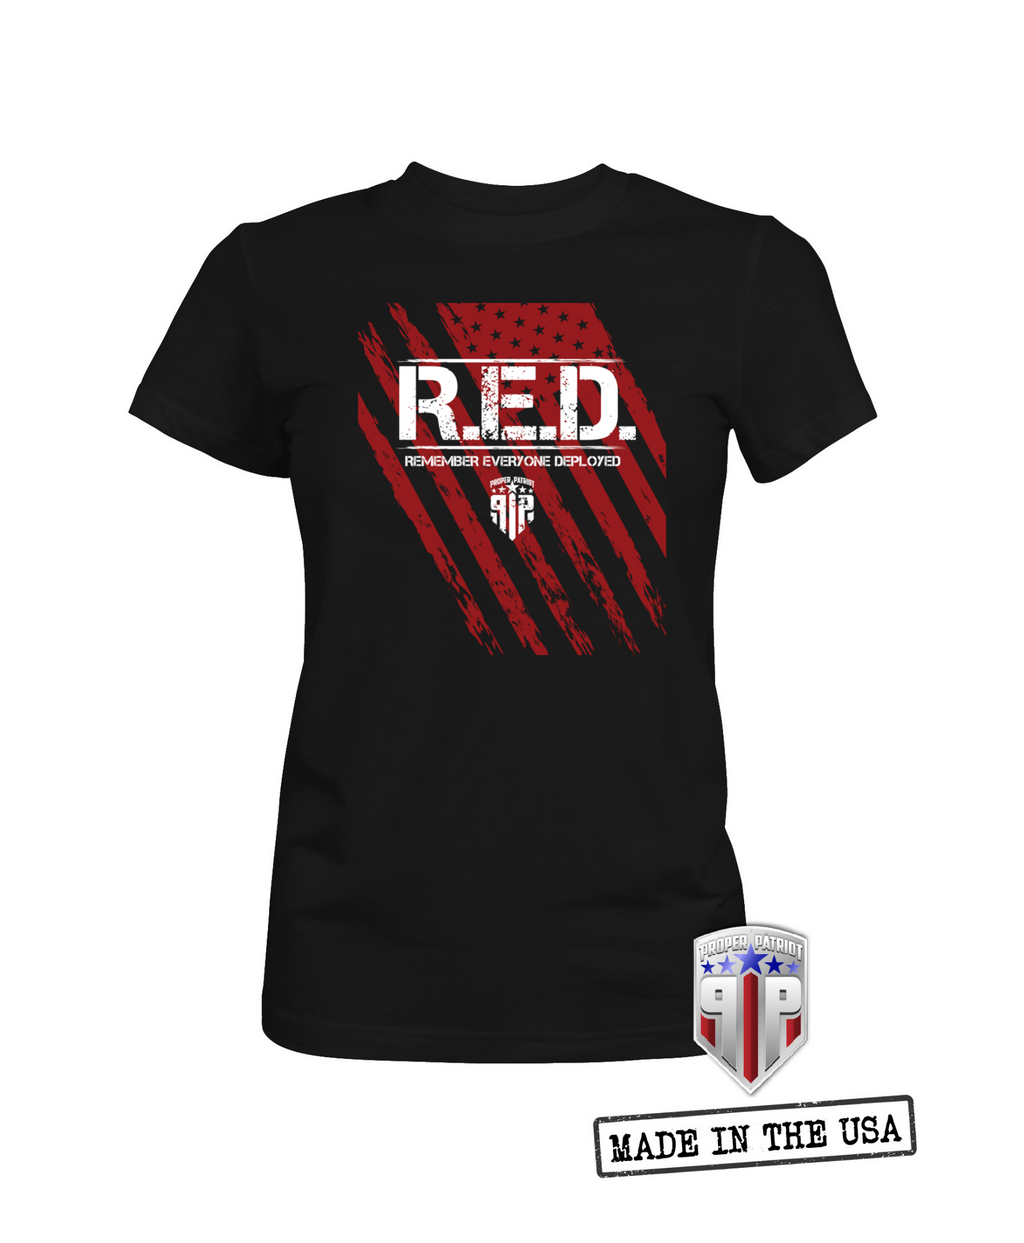 RED Friday Tattered Flag - Remember Everyone Deployed - Women's Patriotic Shirts